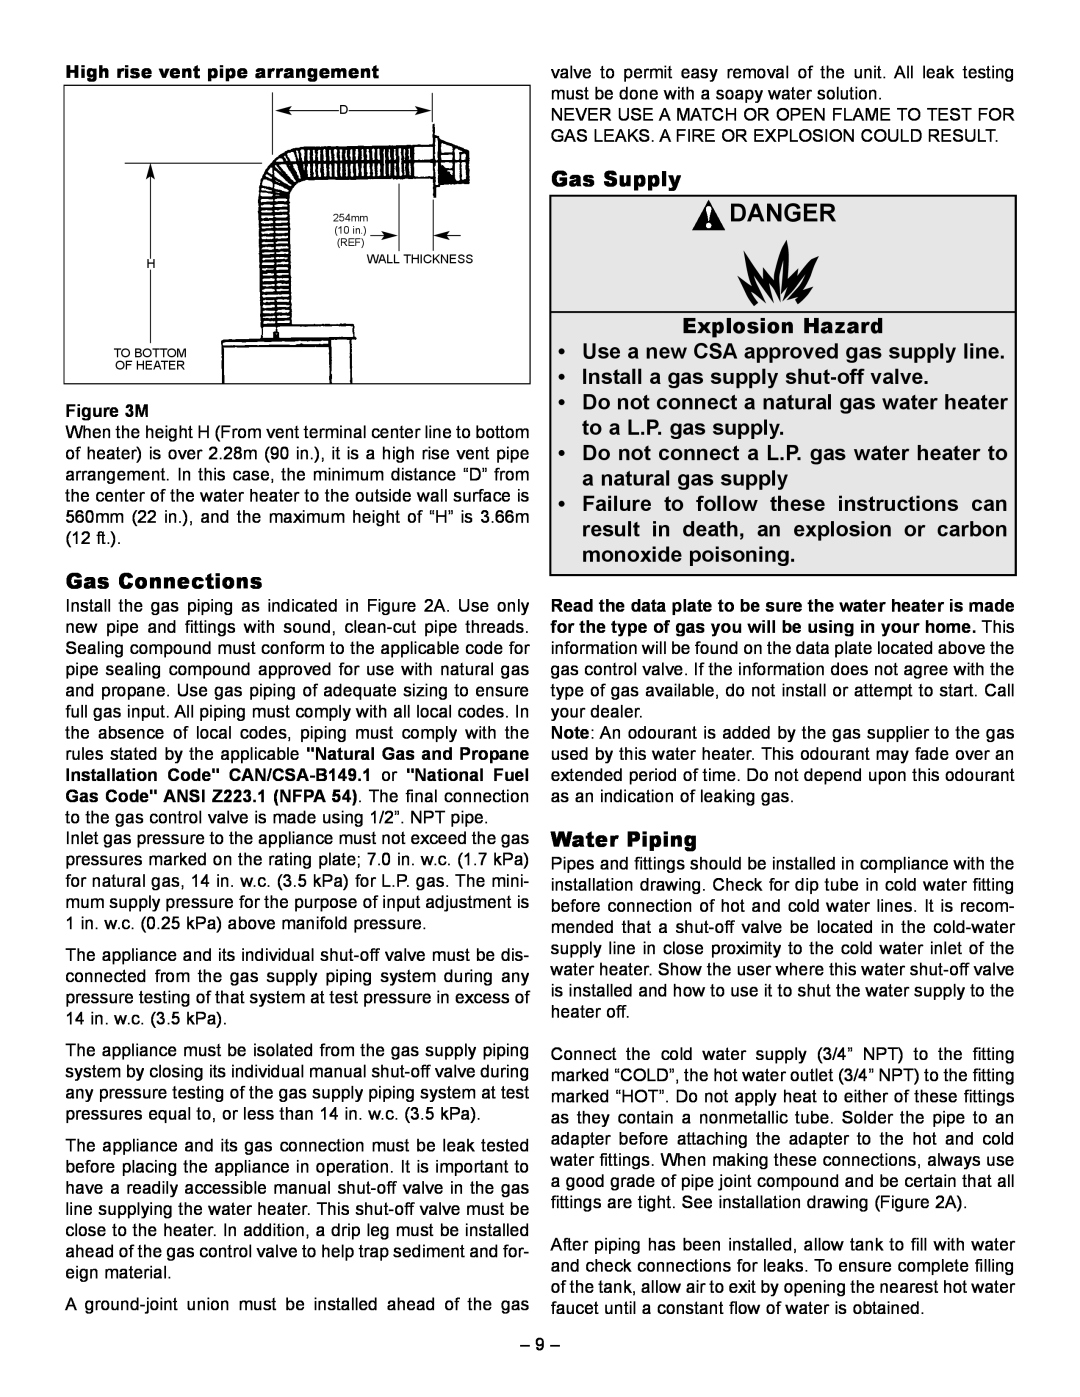 GSW 61009 REV. C (09-03) Gas Connections, Gas Supply, Explosion Hazard, Use a new CSA approved gas supply line, M, Danger 